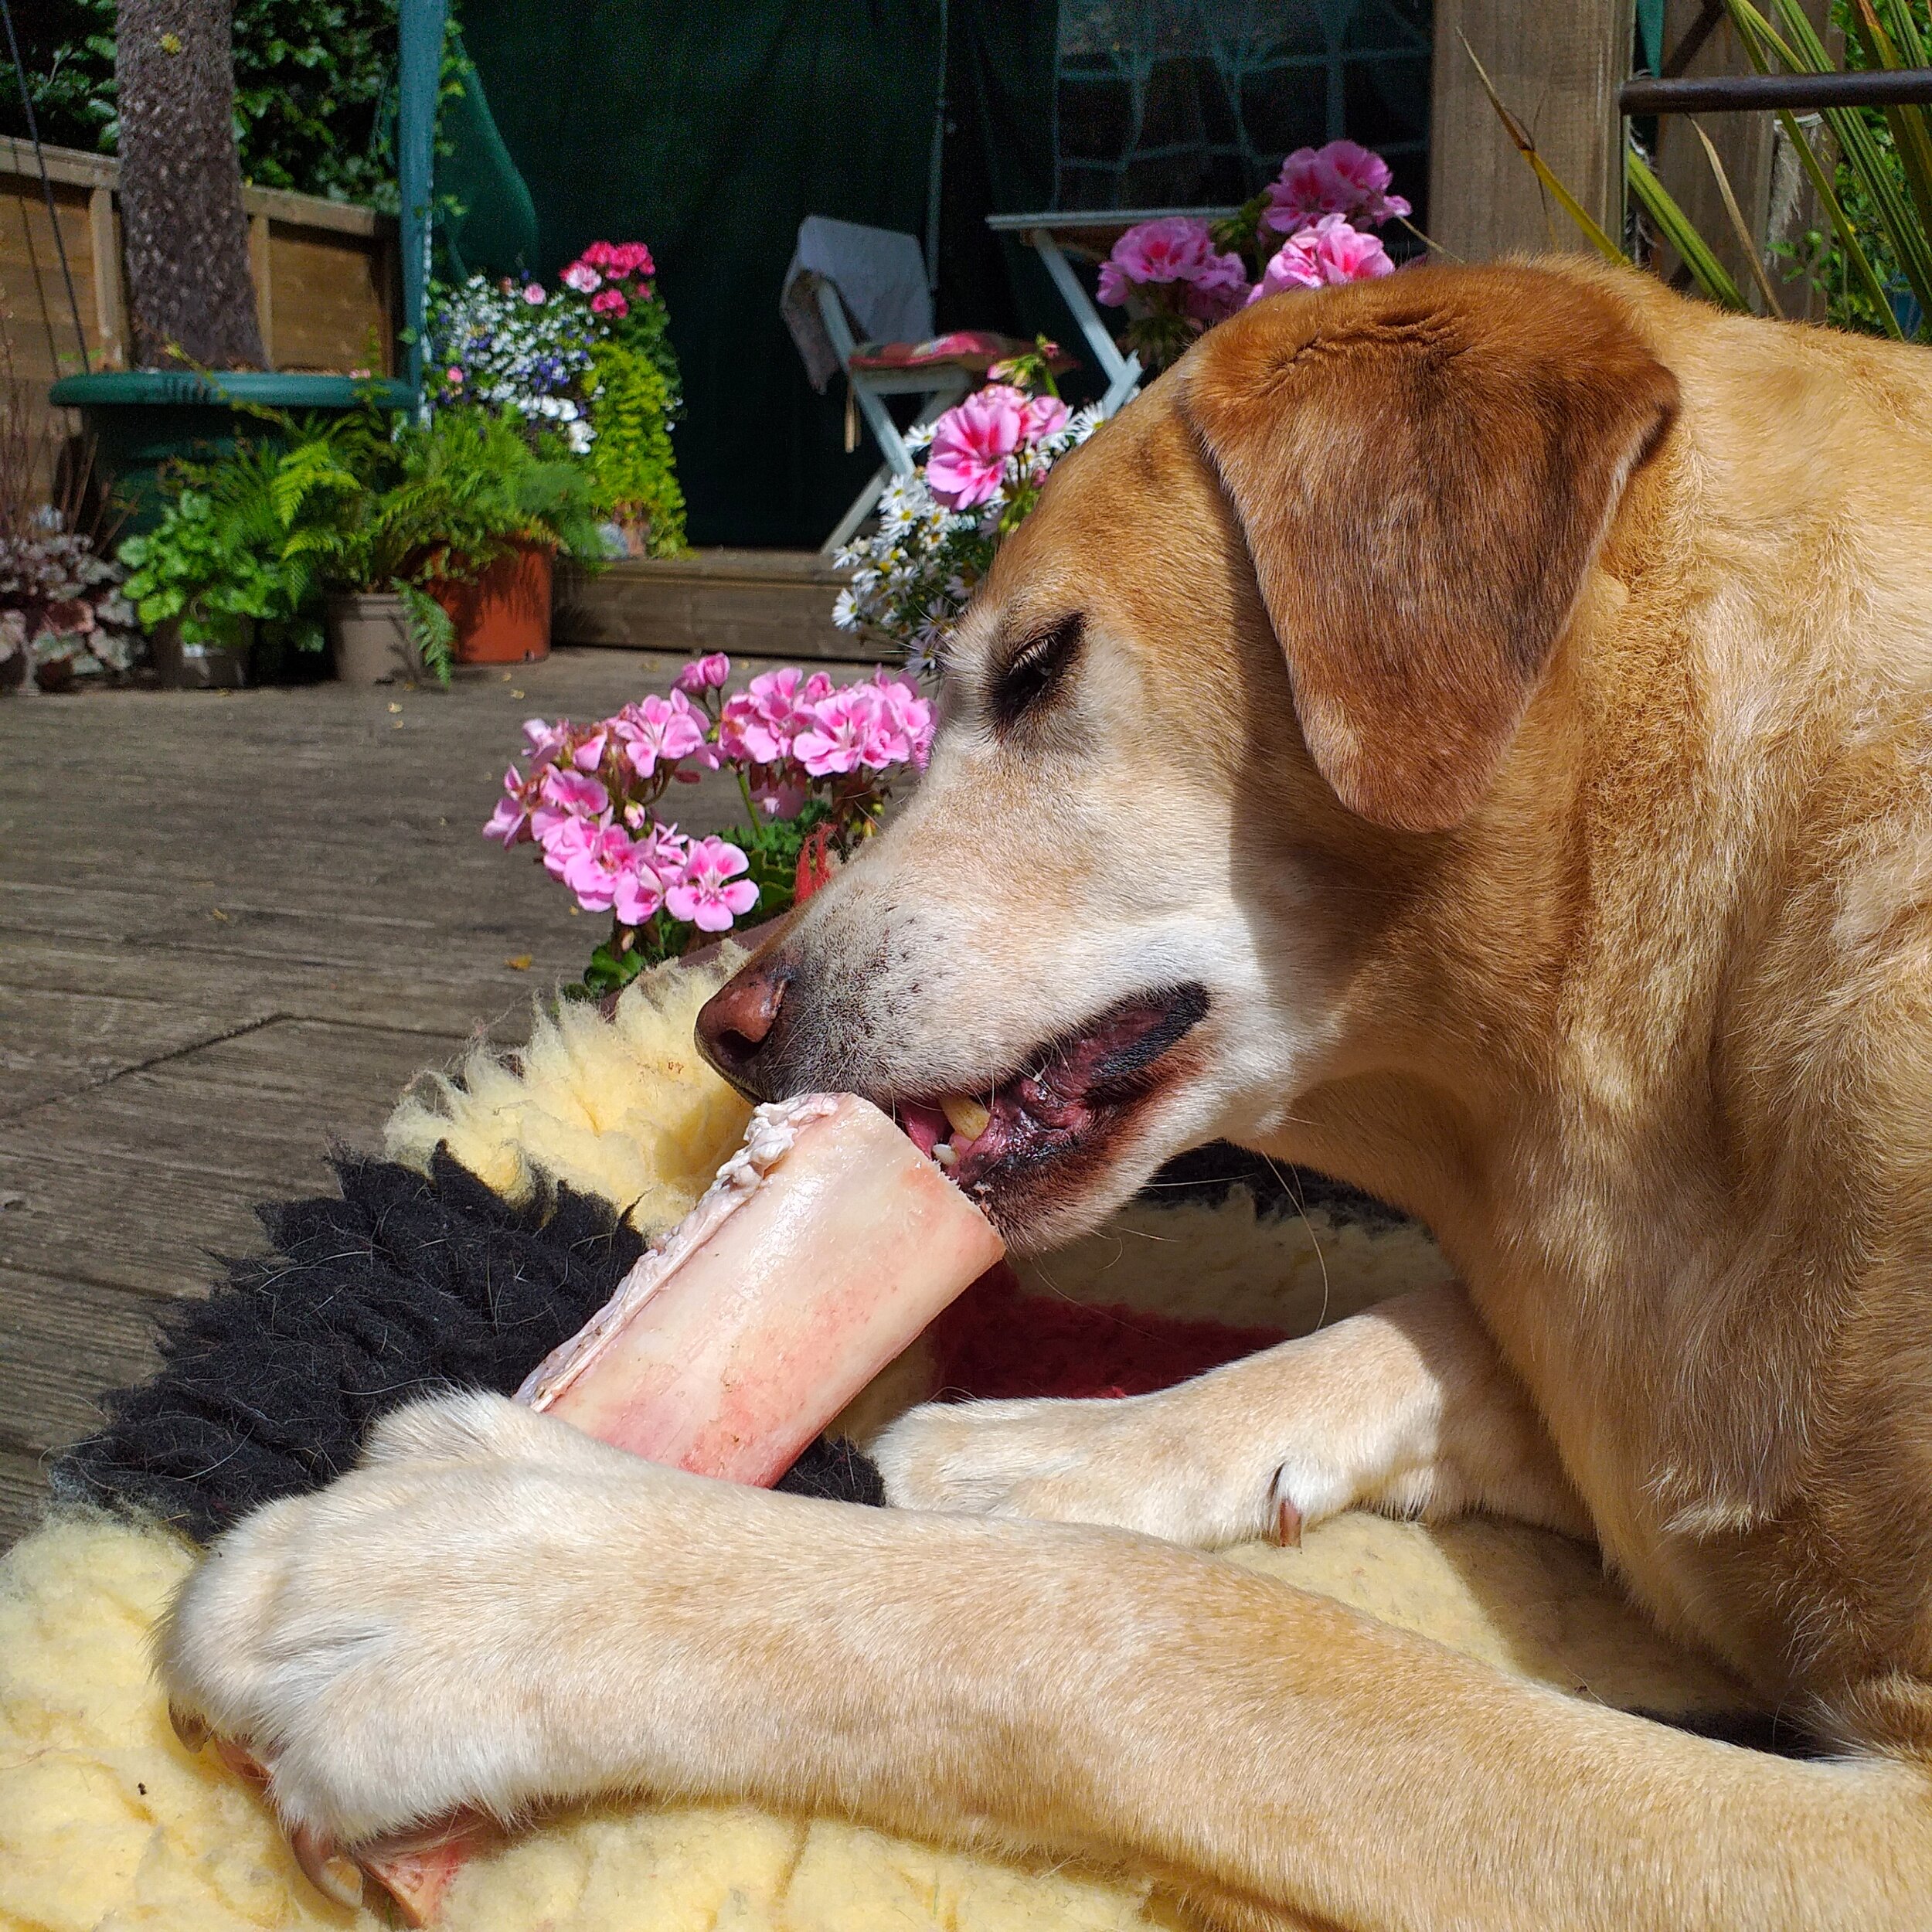 Recreational bones are for teeth cleaning and also release feel good hormones as the dog chews them. They are not included as bone content, as they are not consumed in one sitting.